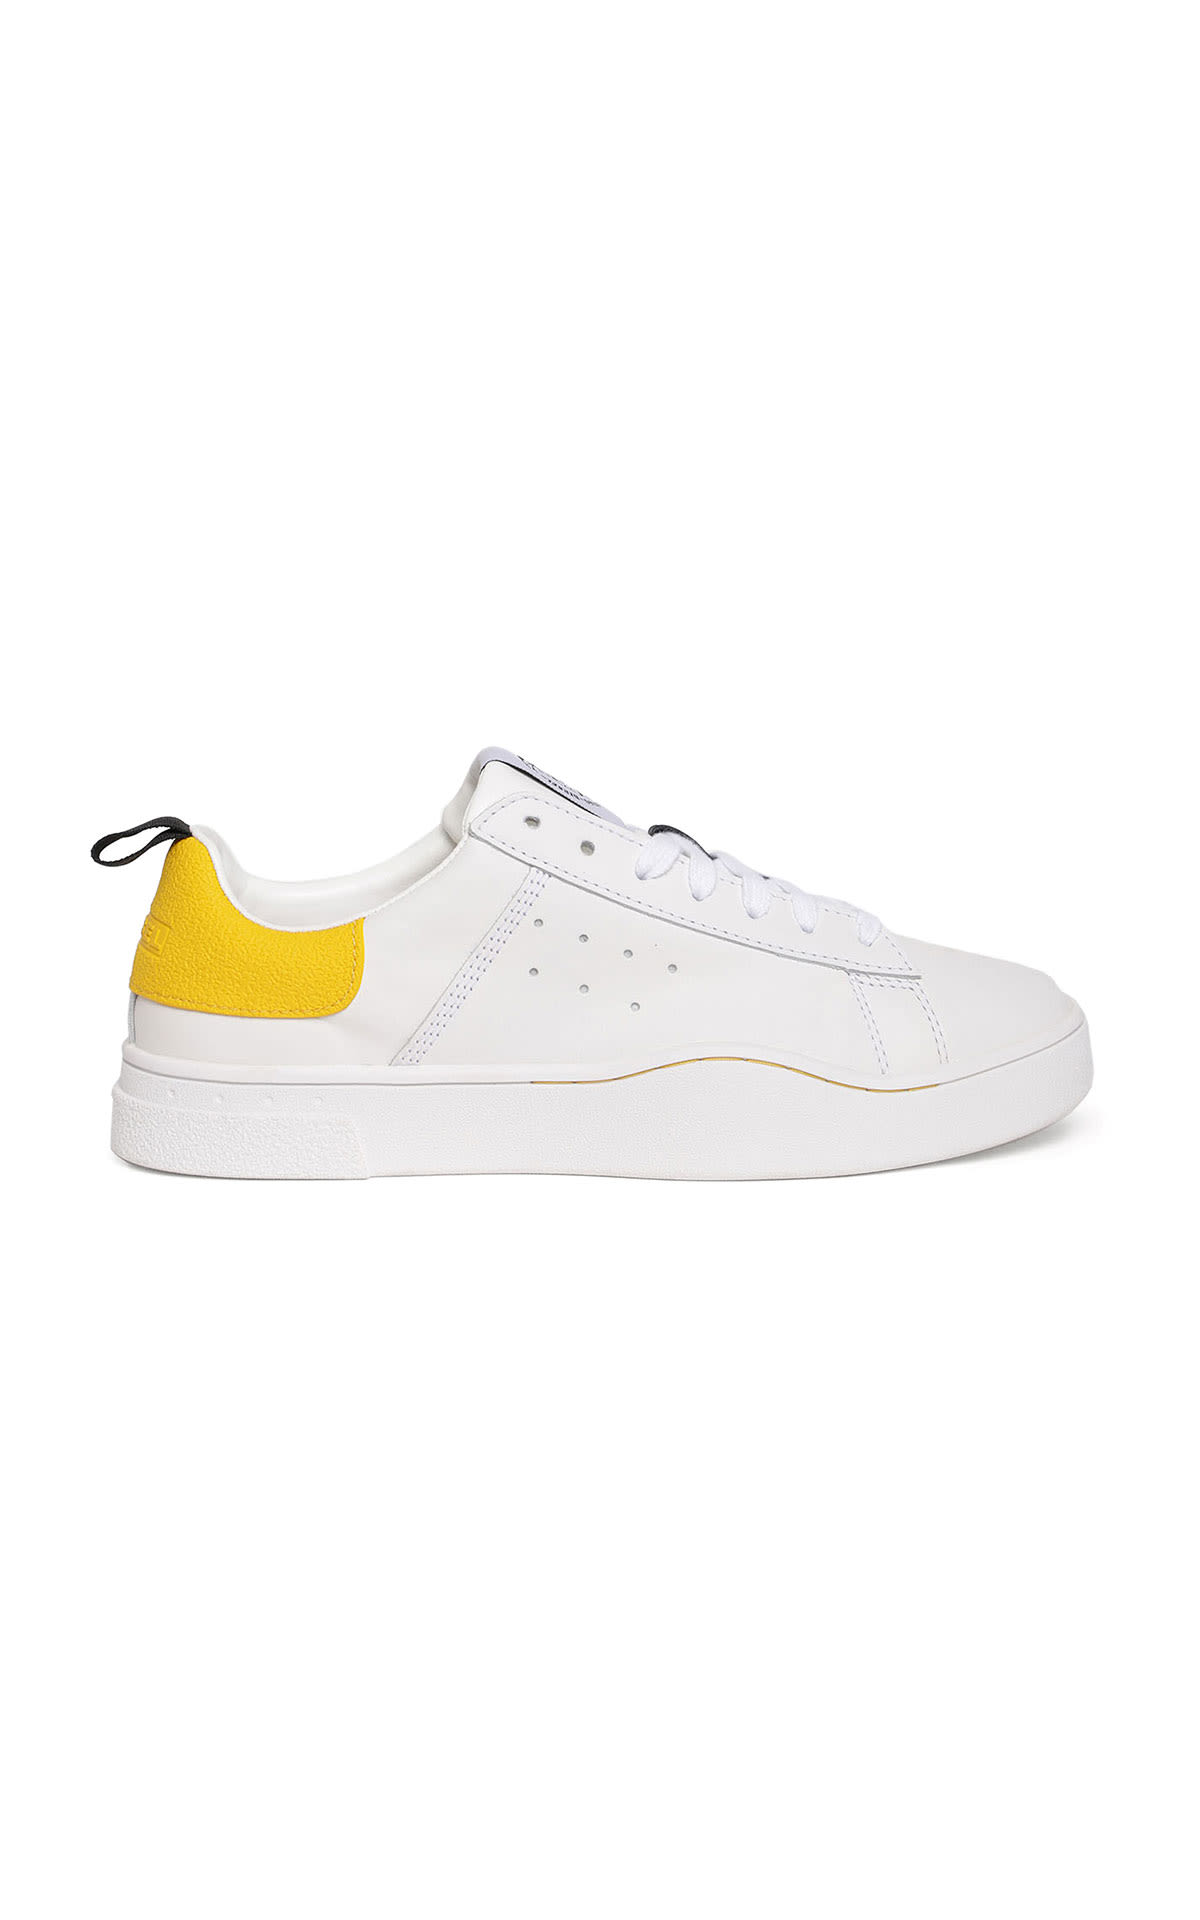 White sneakers with yellow detail on the heel Diesel